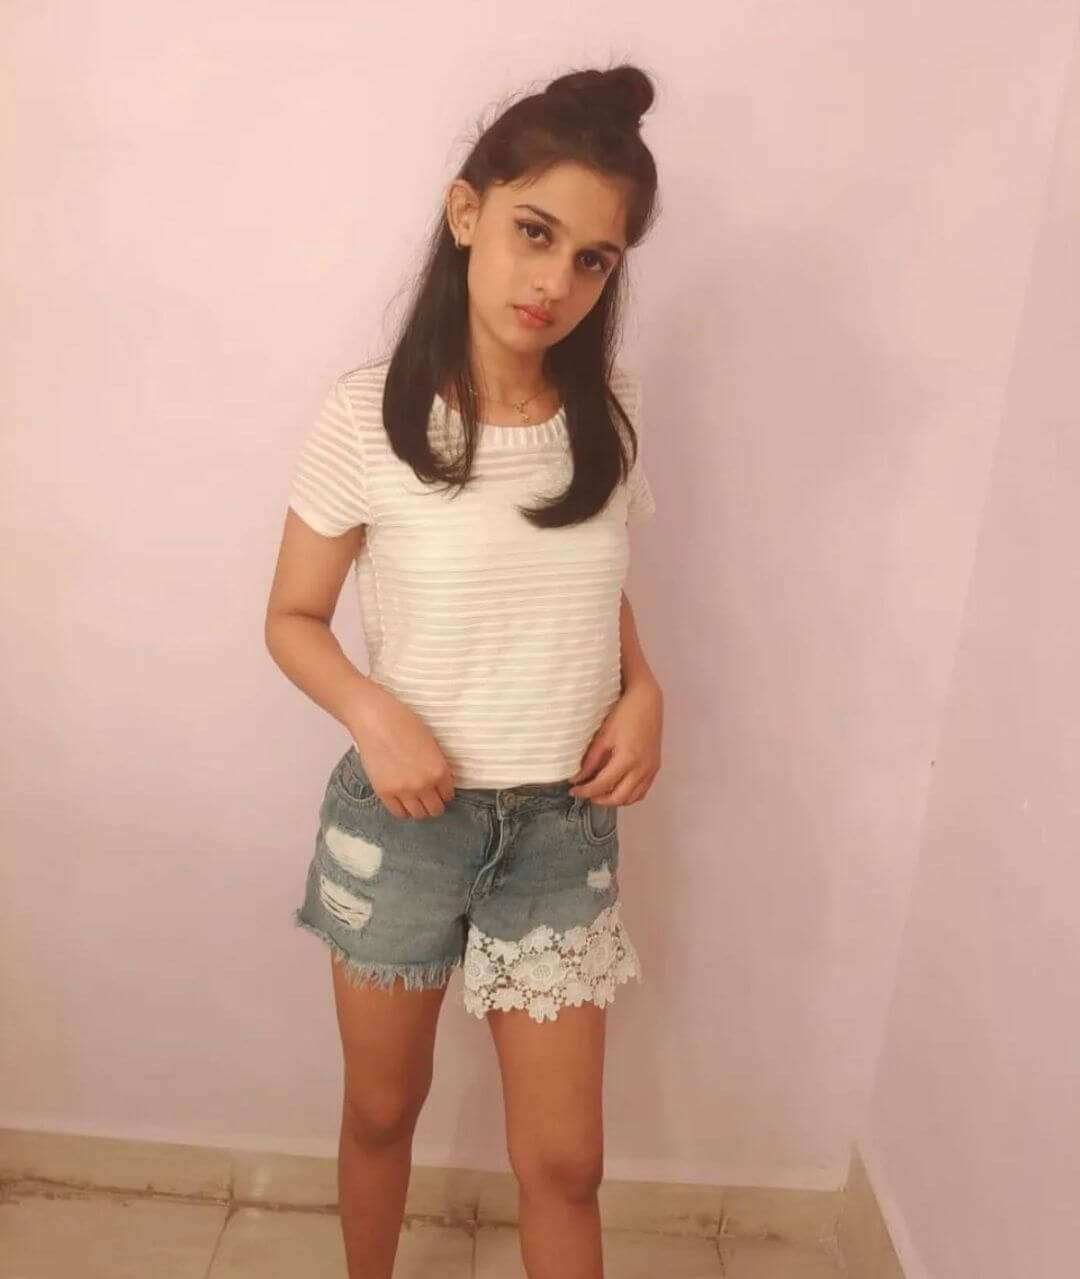 Actress Shruti Choudhary in white top and jeans shorts